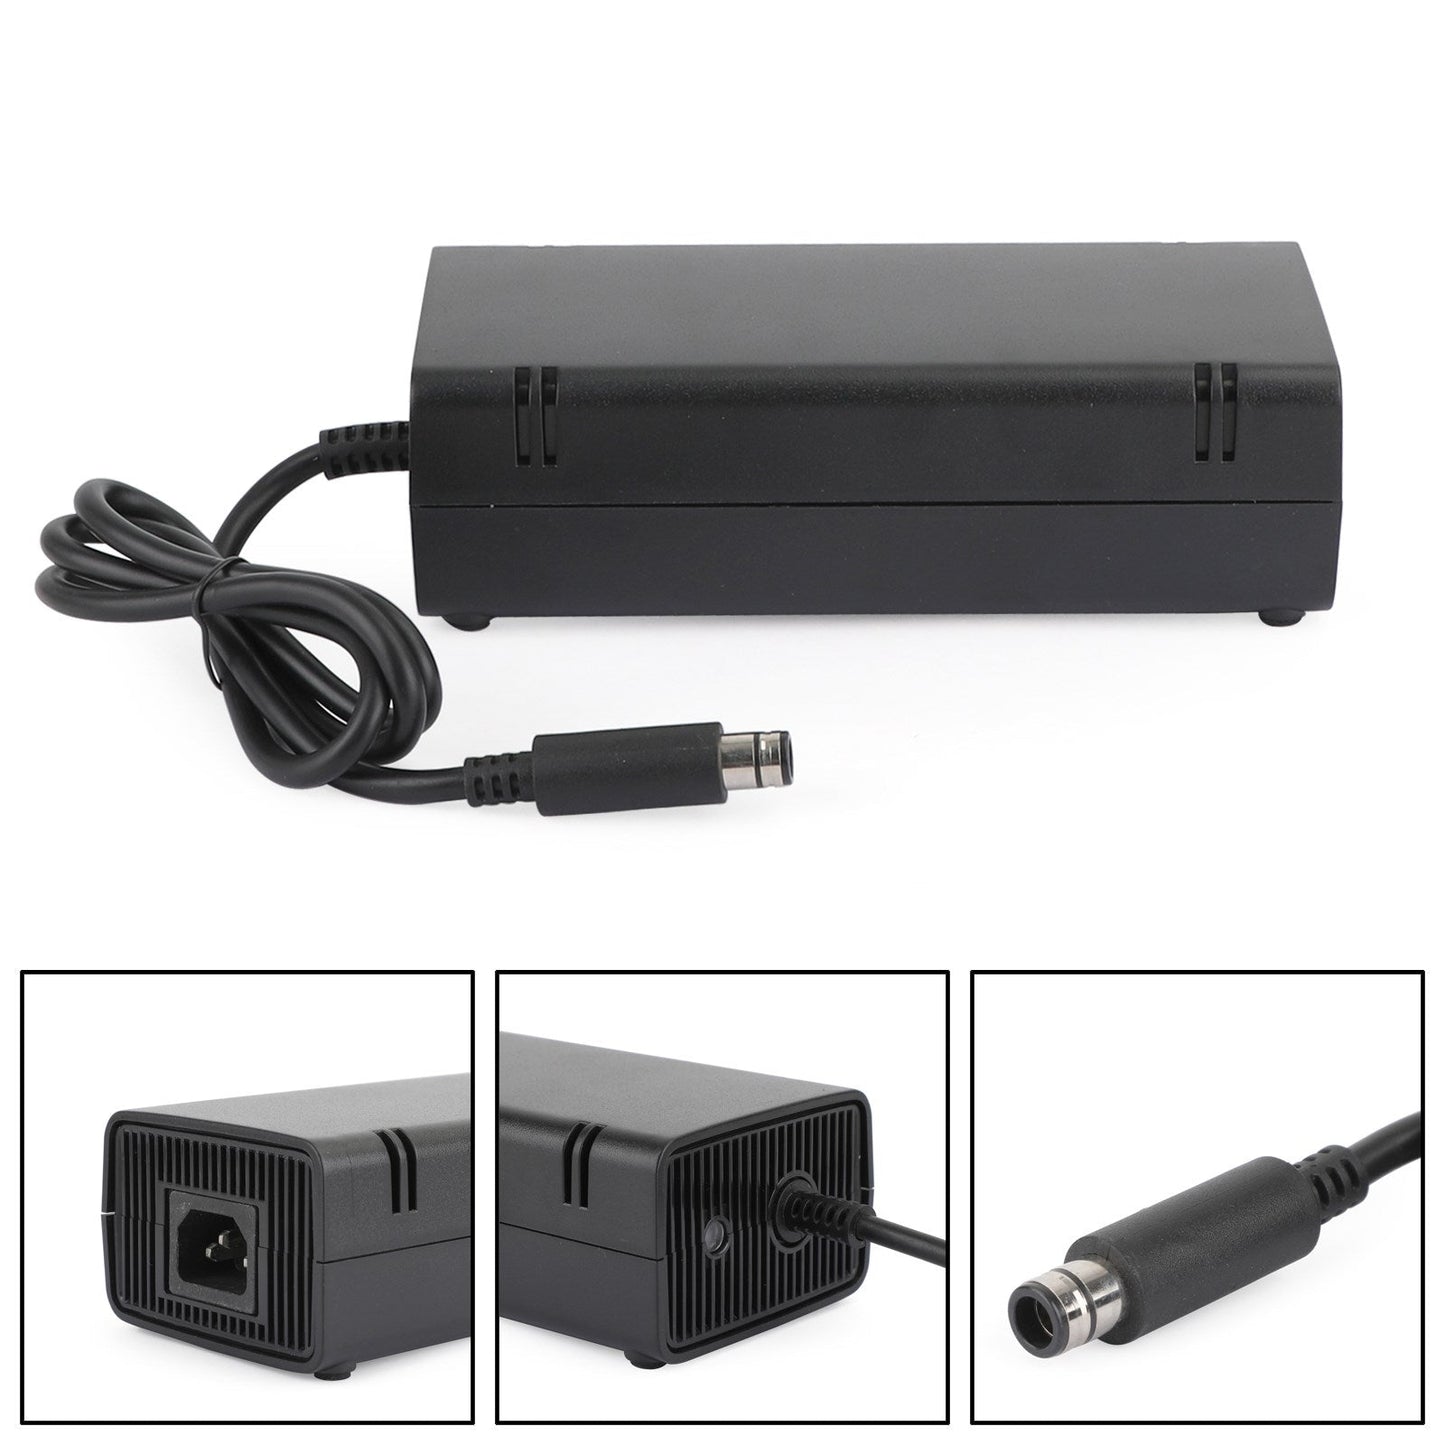 AC Adapter Brick Charger Power Supply Cord 115W Fit for Xbox 360 E US Plug